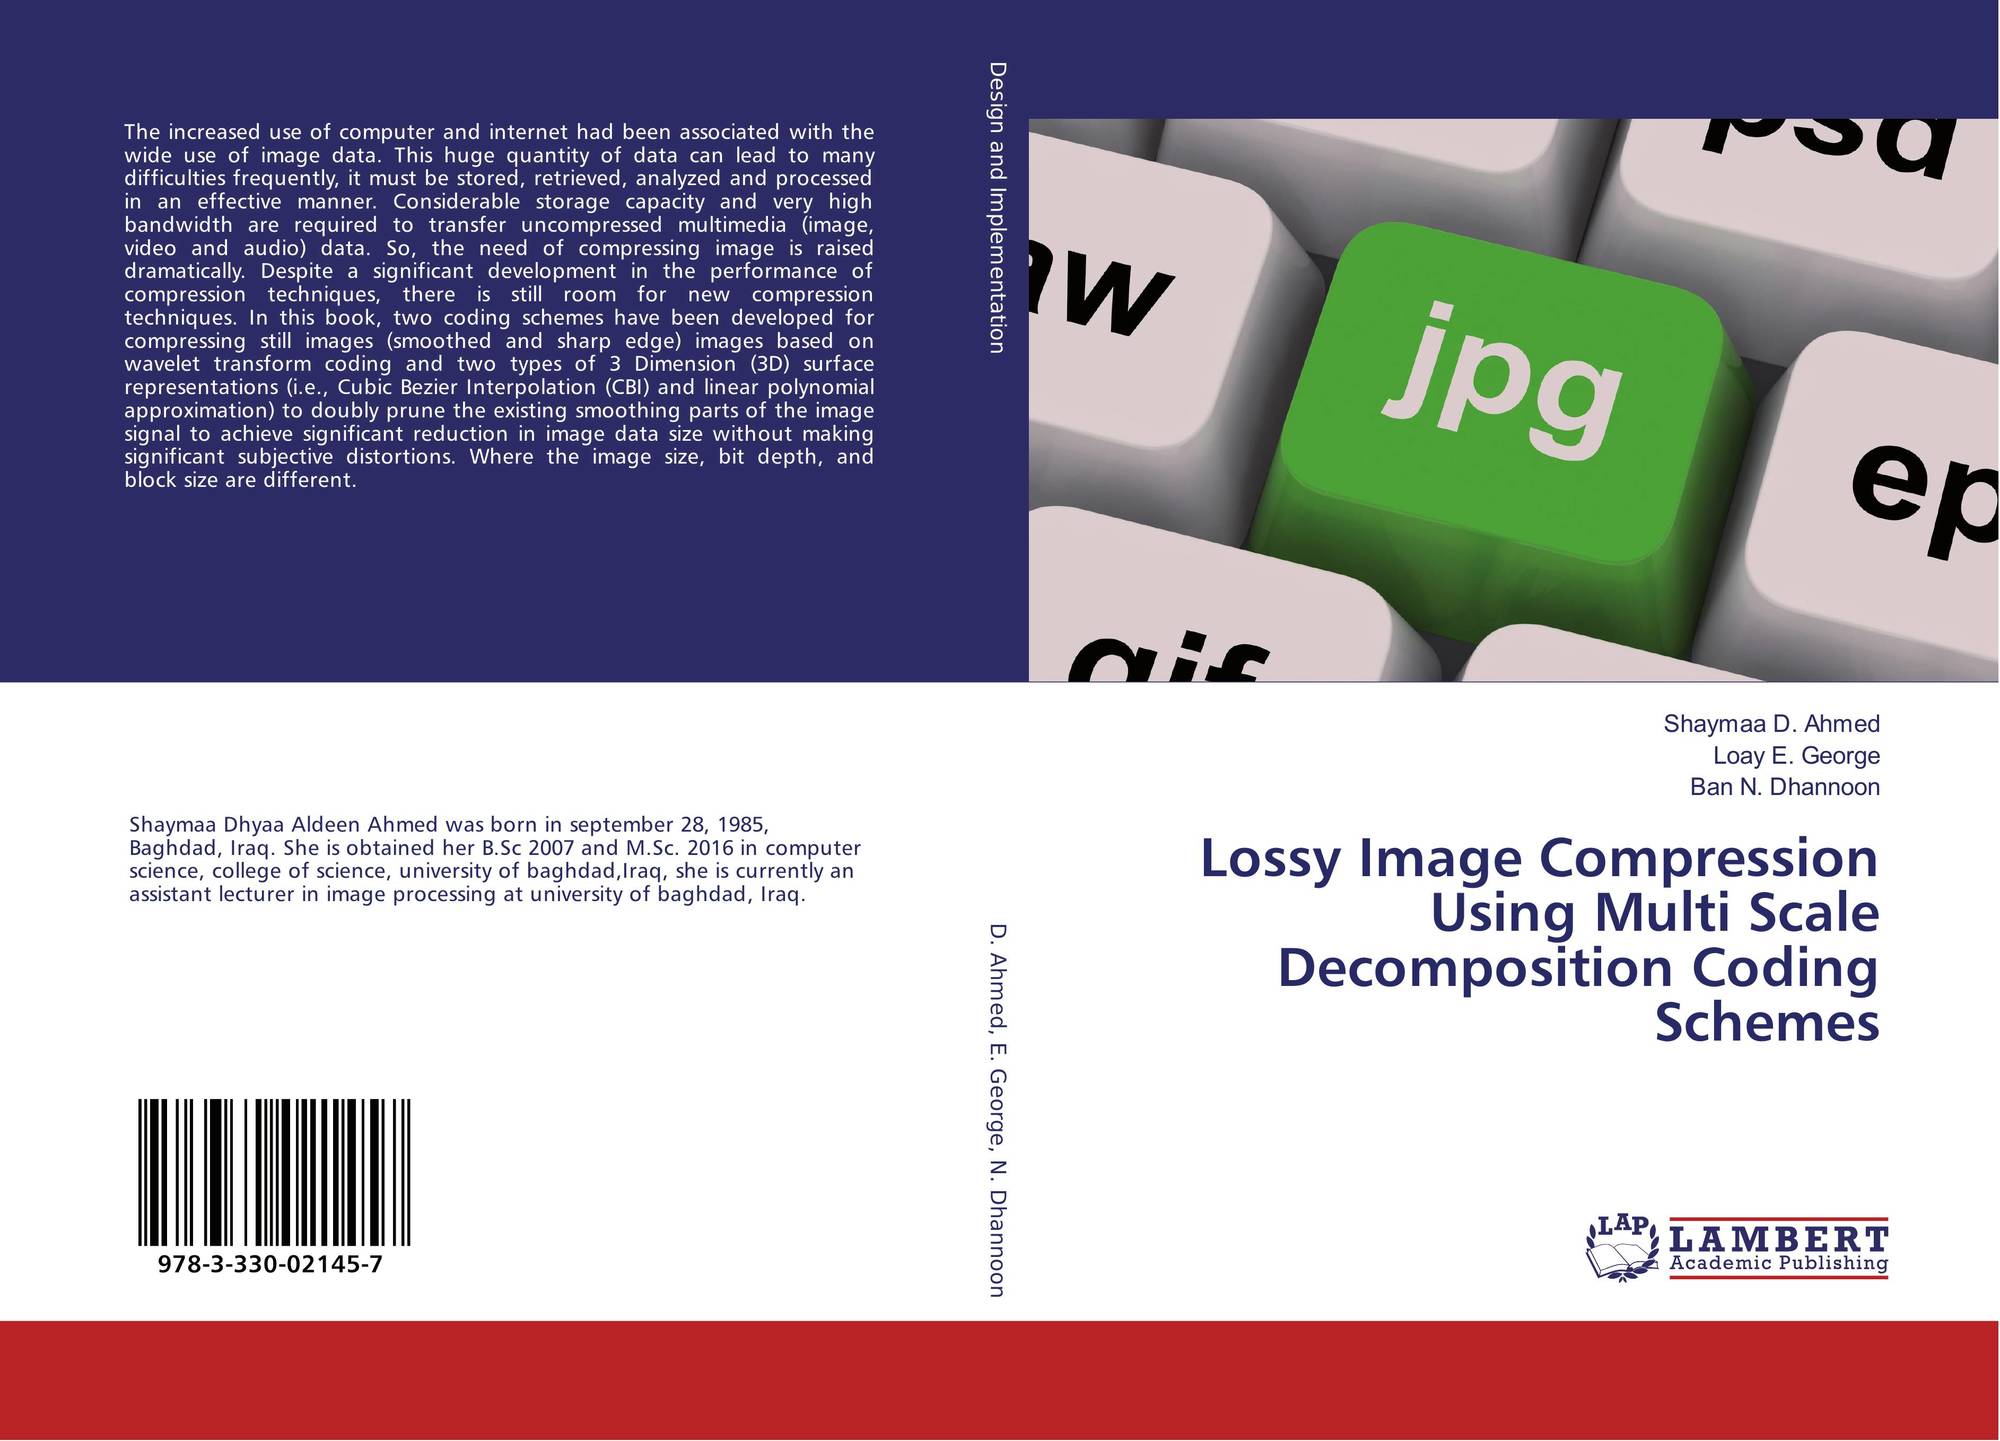 Php книга. ISBN код. Markup tags. Lossy image Compression Types.